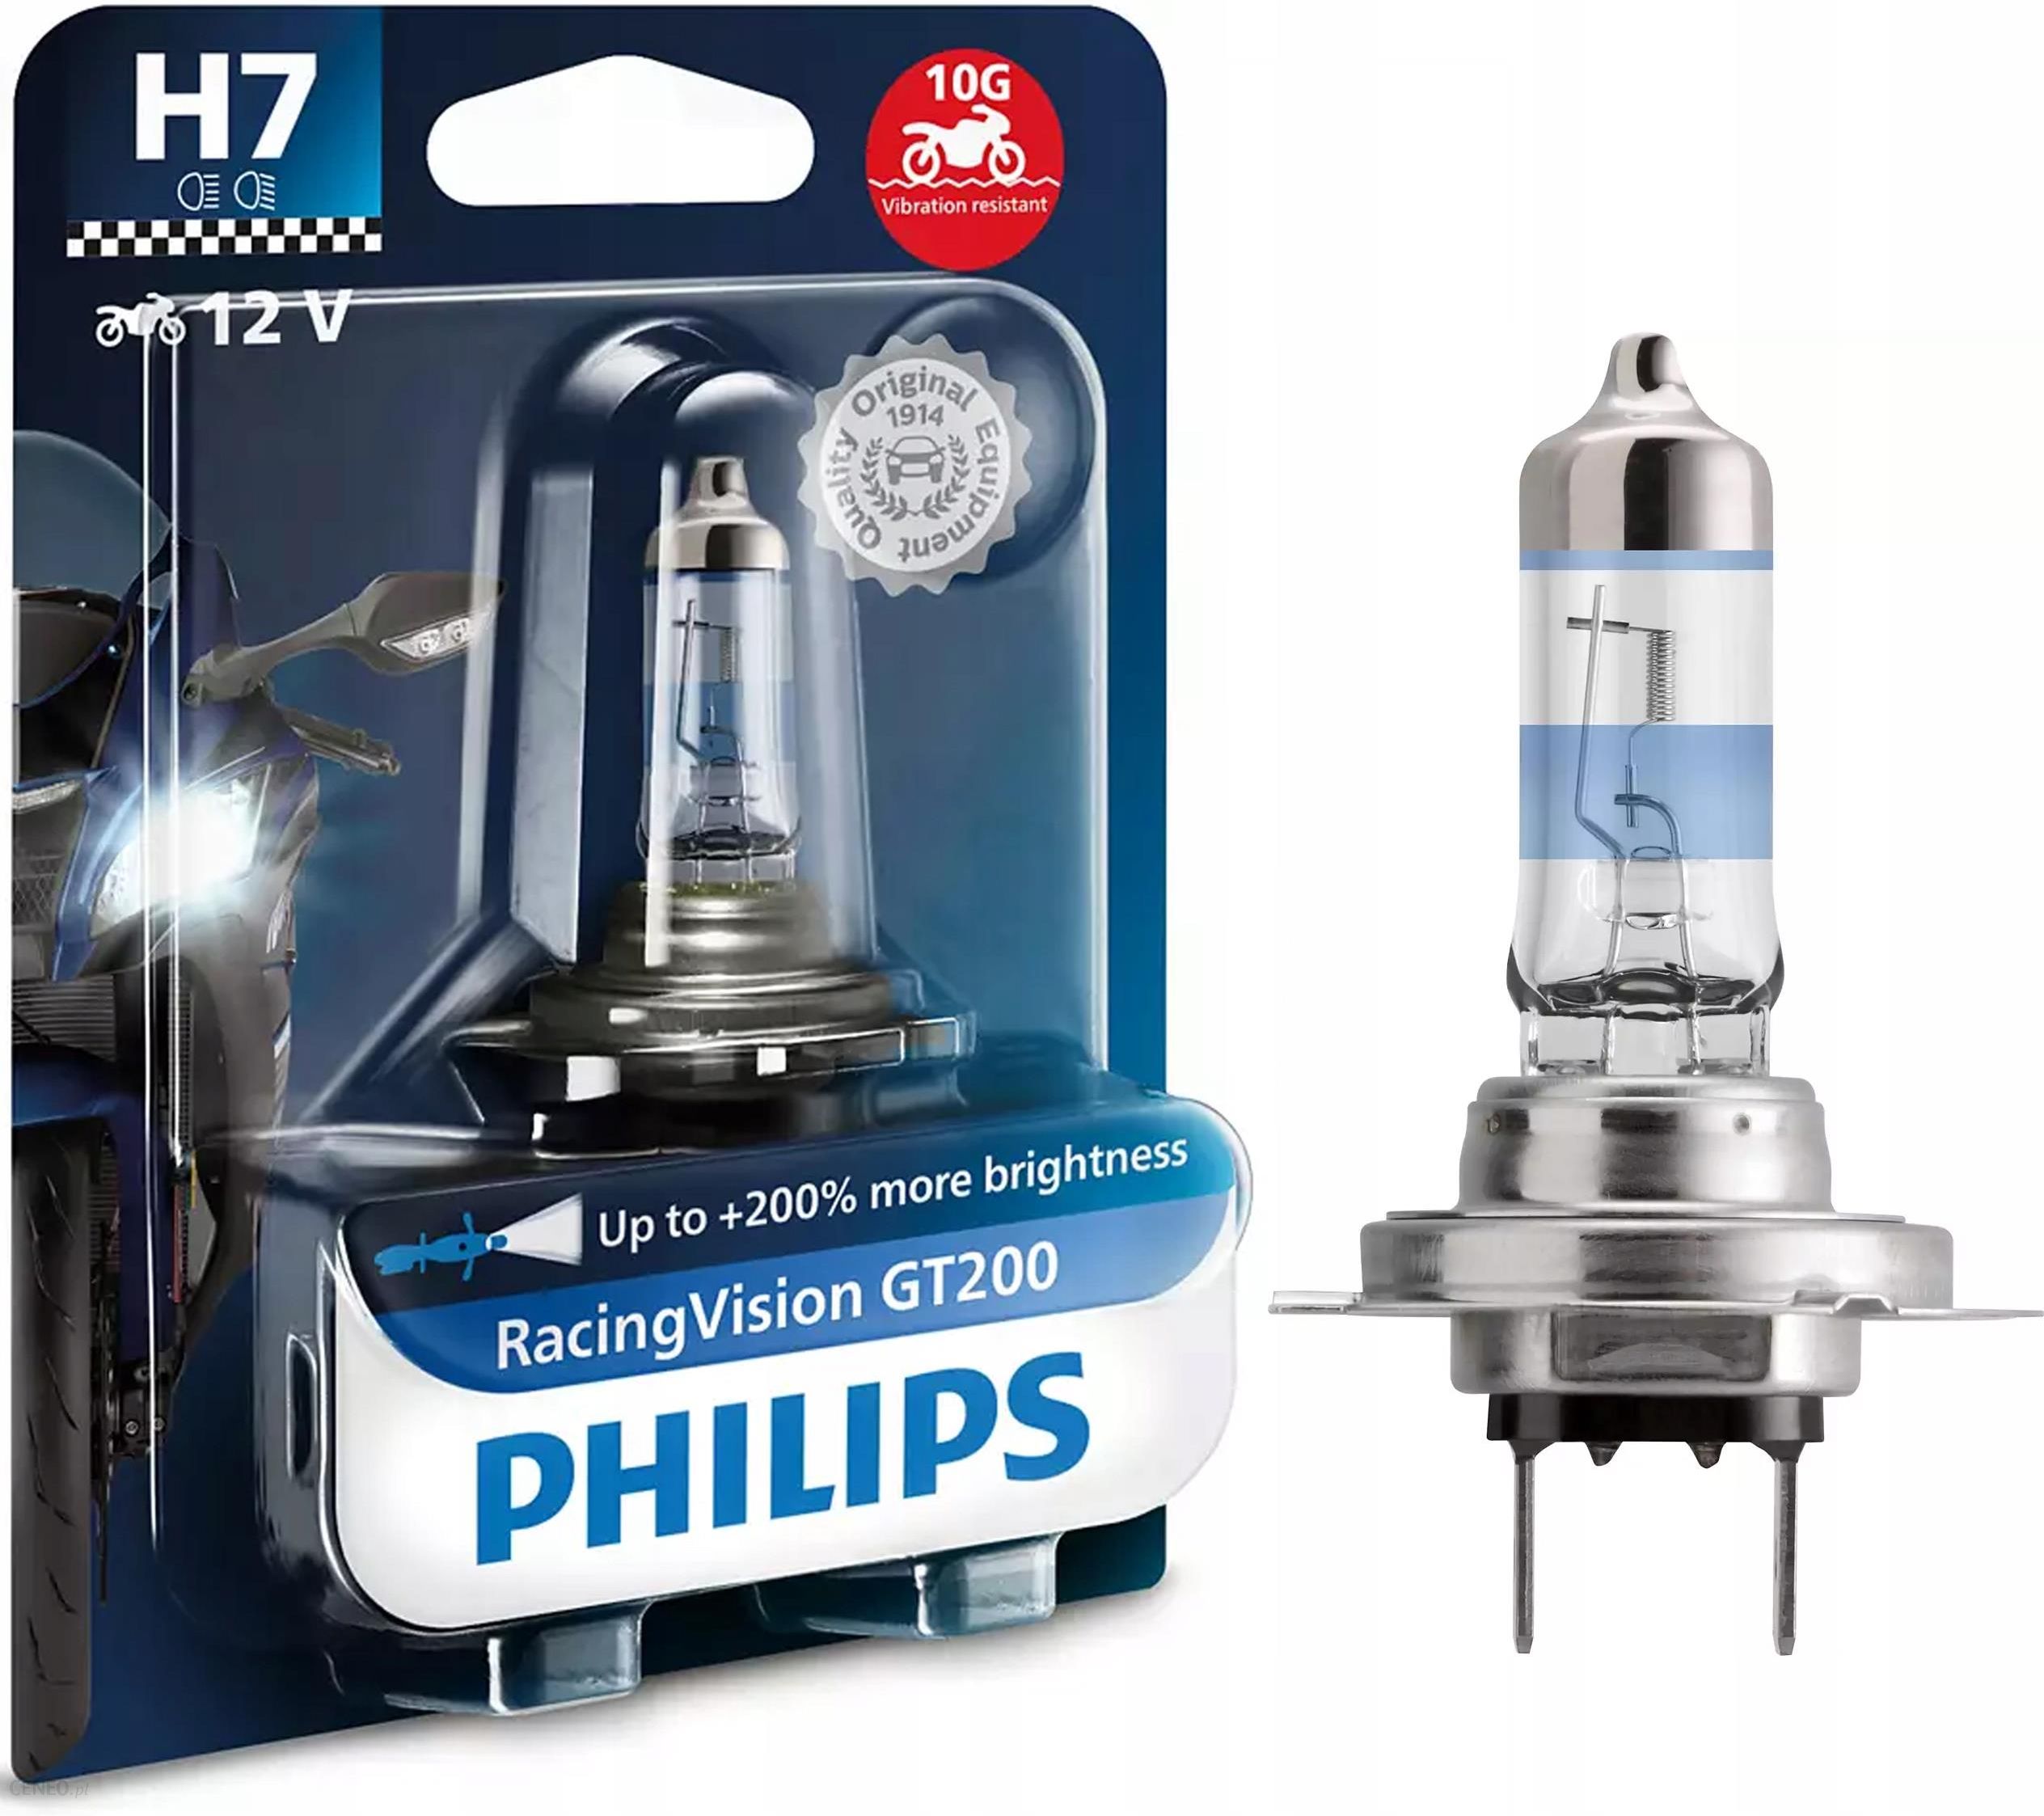 https://image.ceneostatic.pl/data/products/155271012/i-philips-racing-vision-gt200-h7-moto-12v-55w.jpg